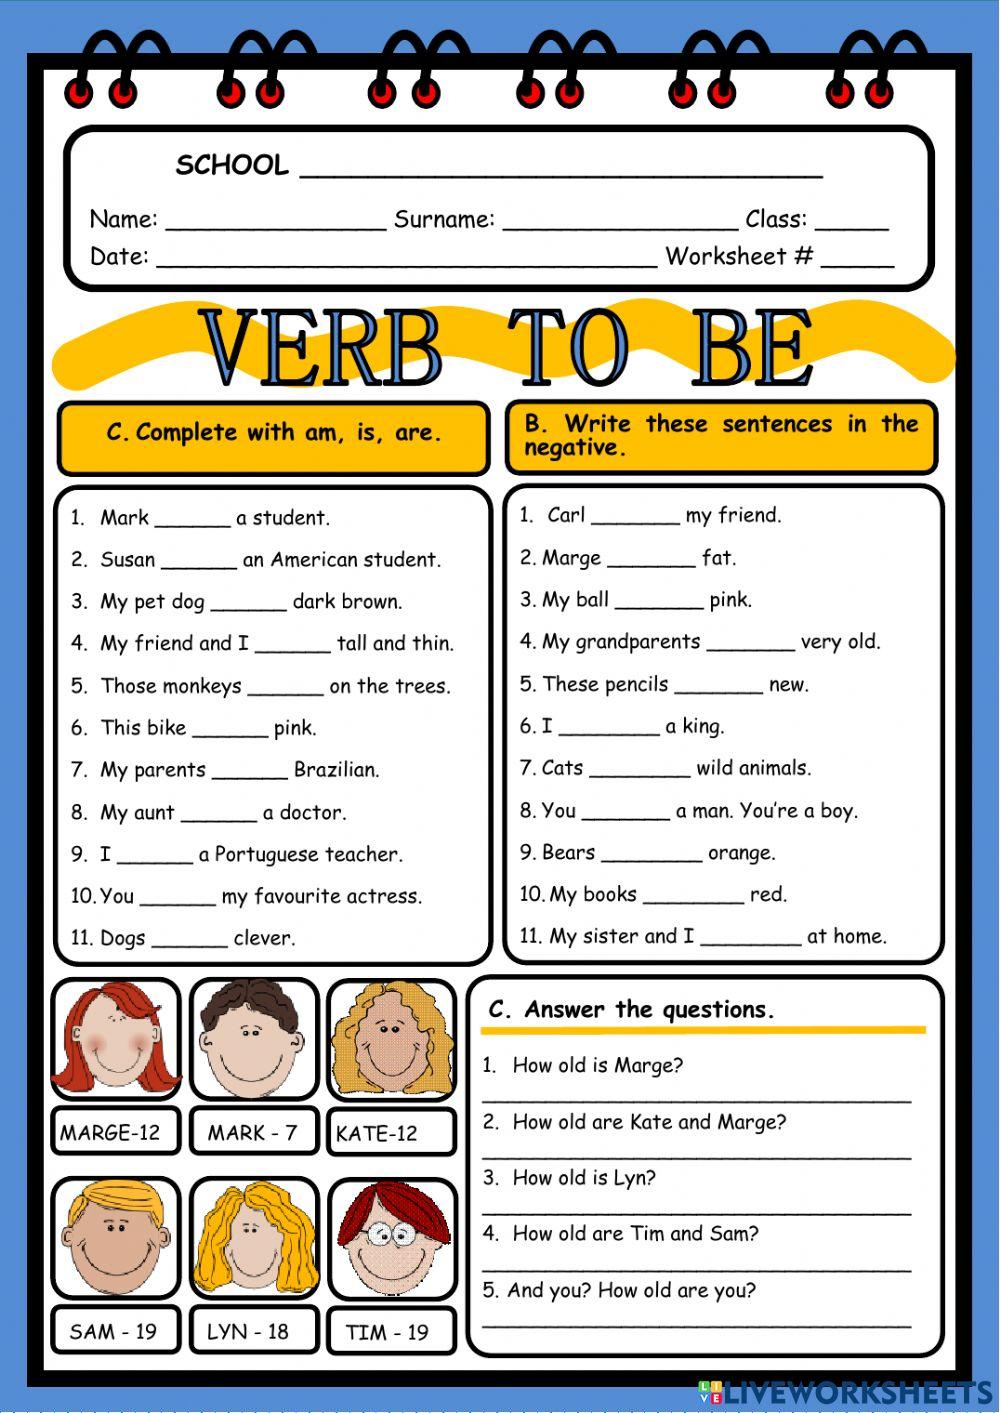 Verb to be